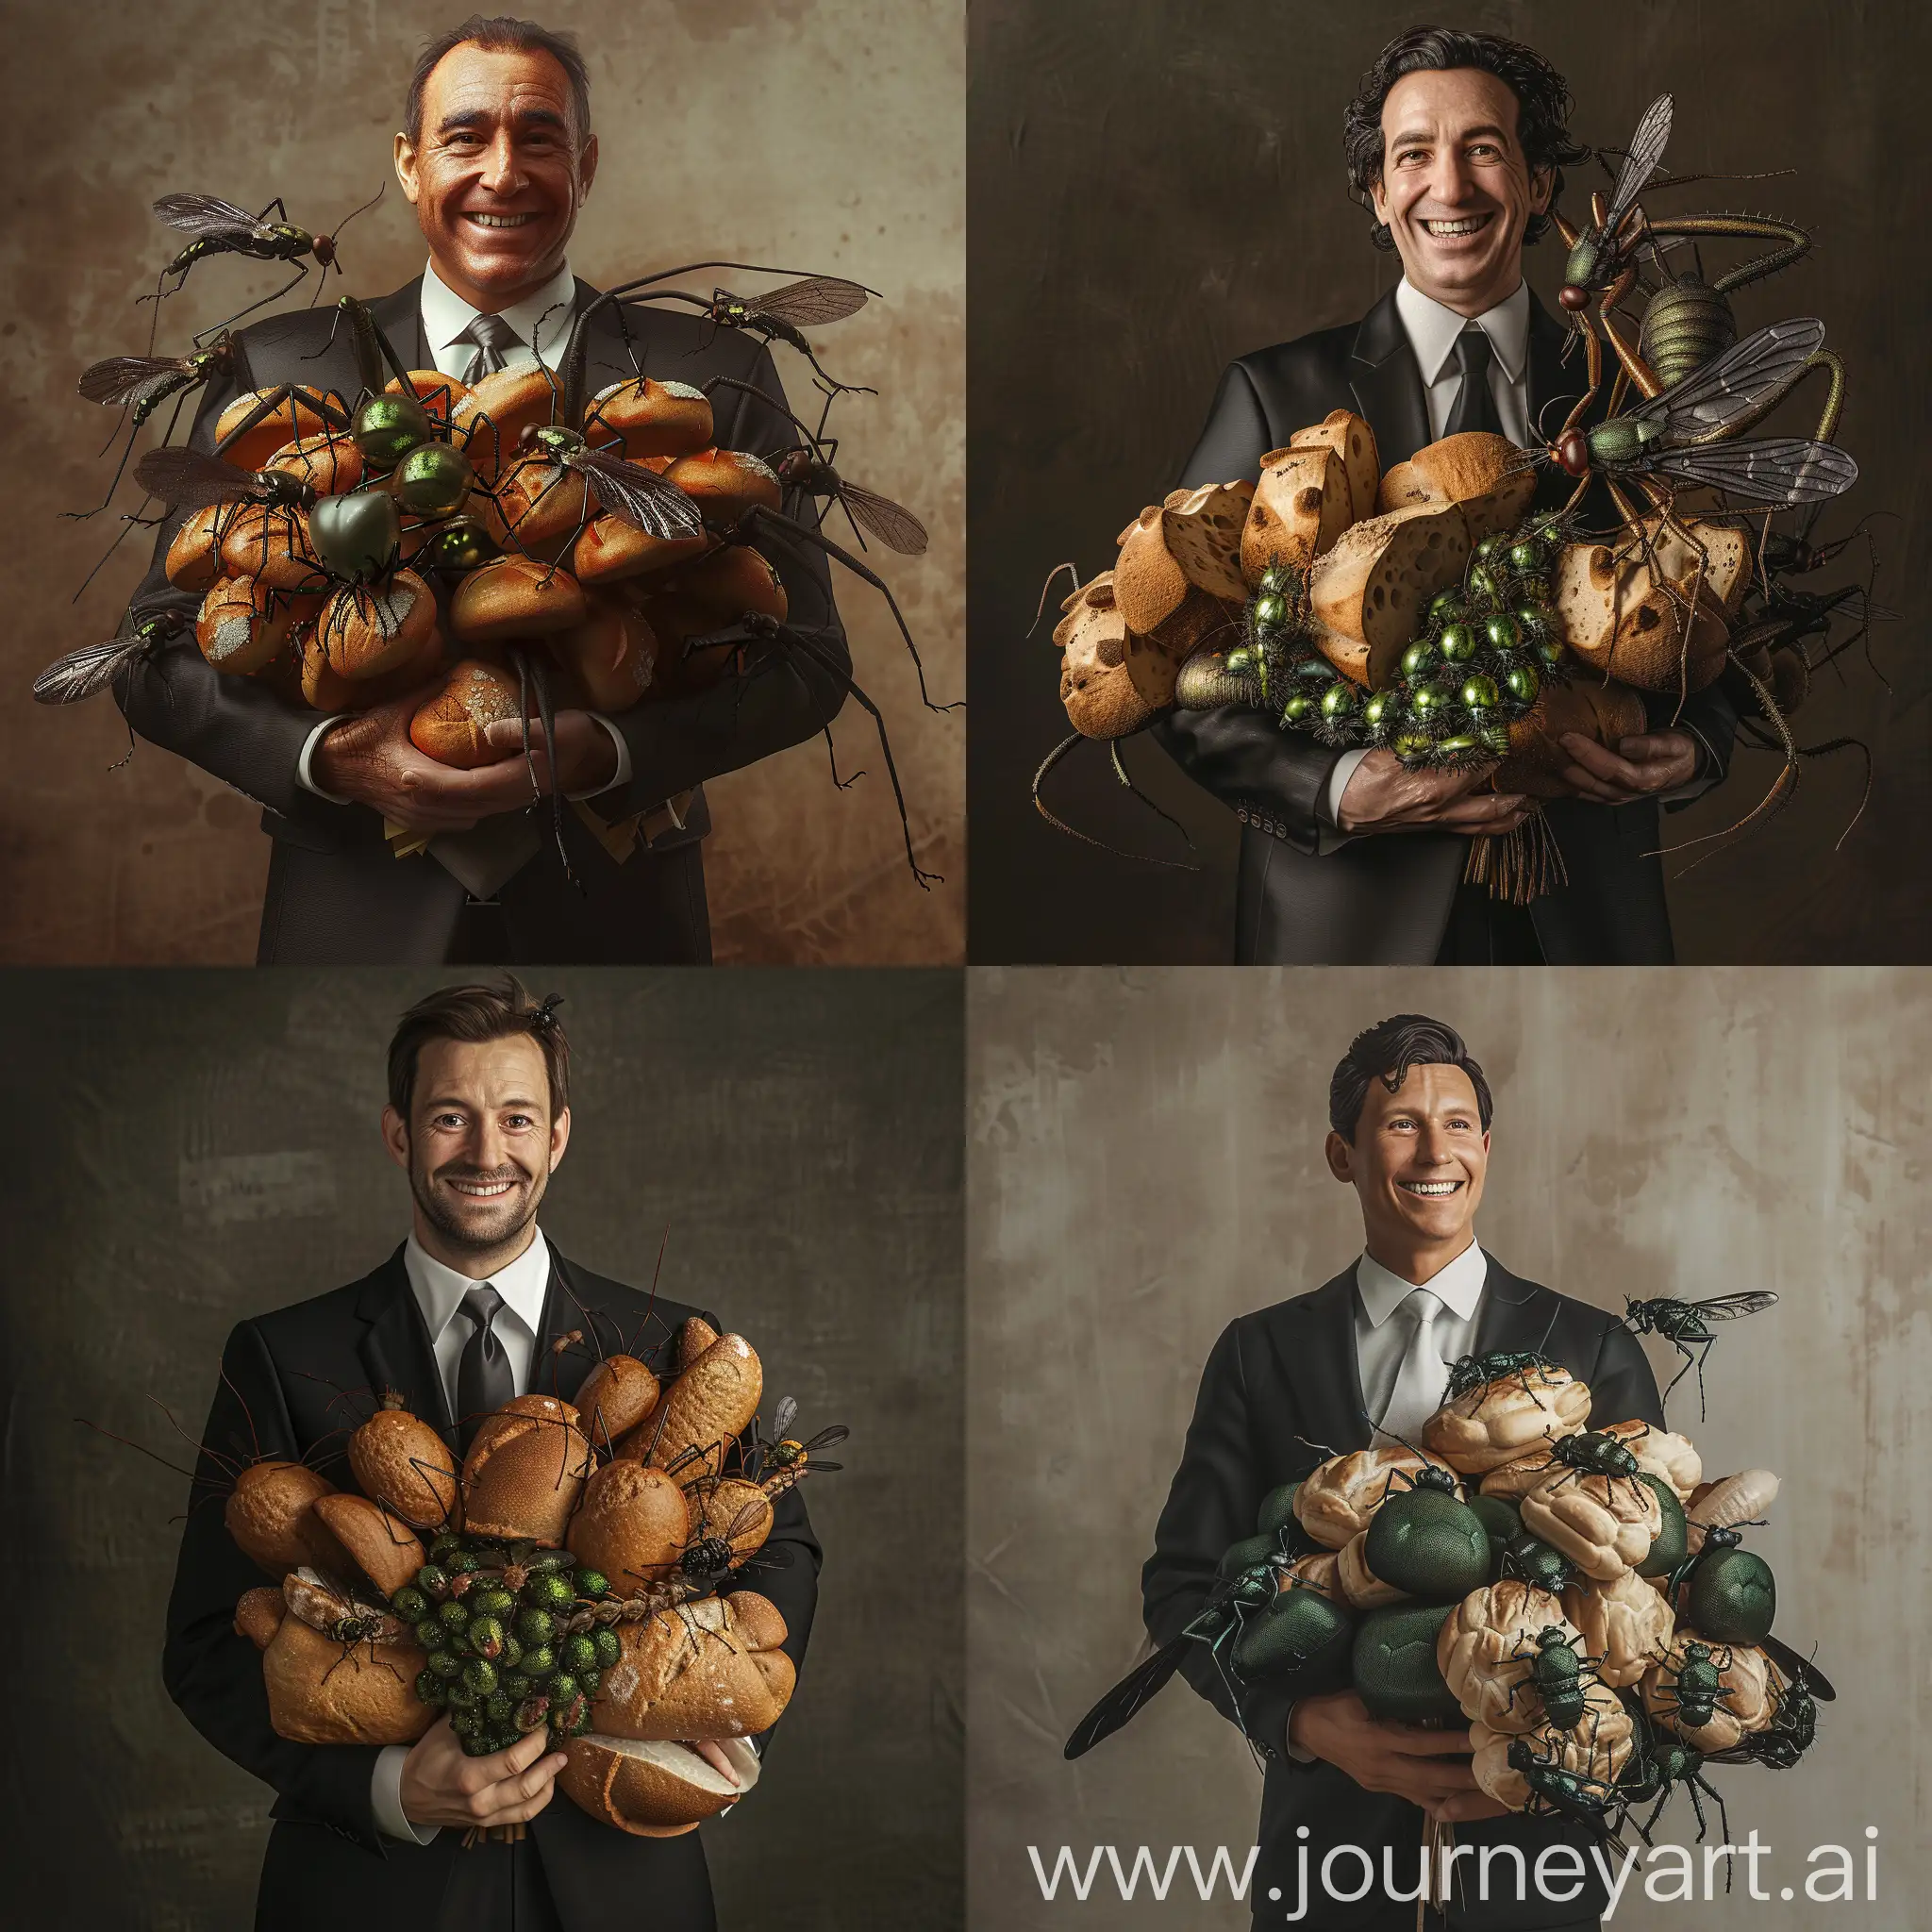 A smiling man in an impeccably tailored black business suit, crisp white dress shirt, and silk necktie. He is holding an unusual bouquet made of fresh baked bread loaves interwoven with clusters of dung flies, their iridescent green bodies glistening in the light. Nestled among the bread are also several large crickets perched nonchalantly, Photorealistic render, 8K resolution, incredibly detailed, studio lighting, professional photography